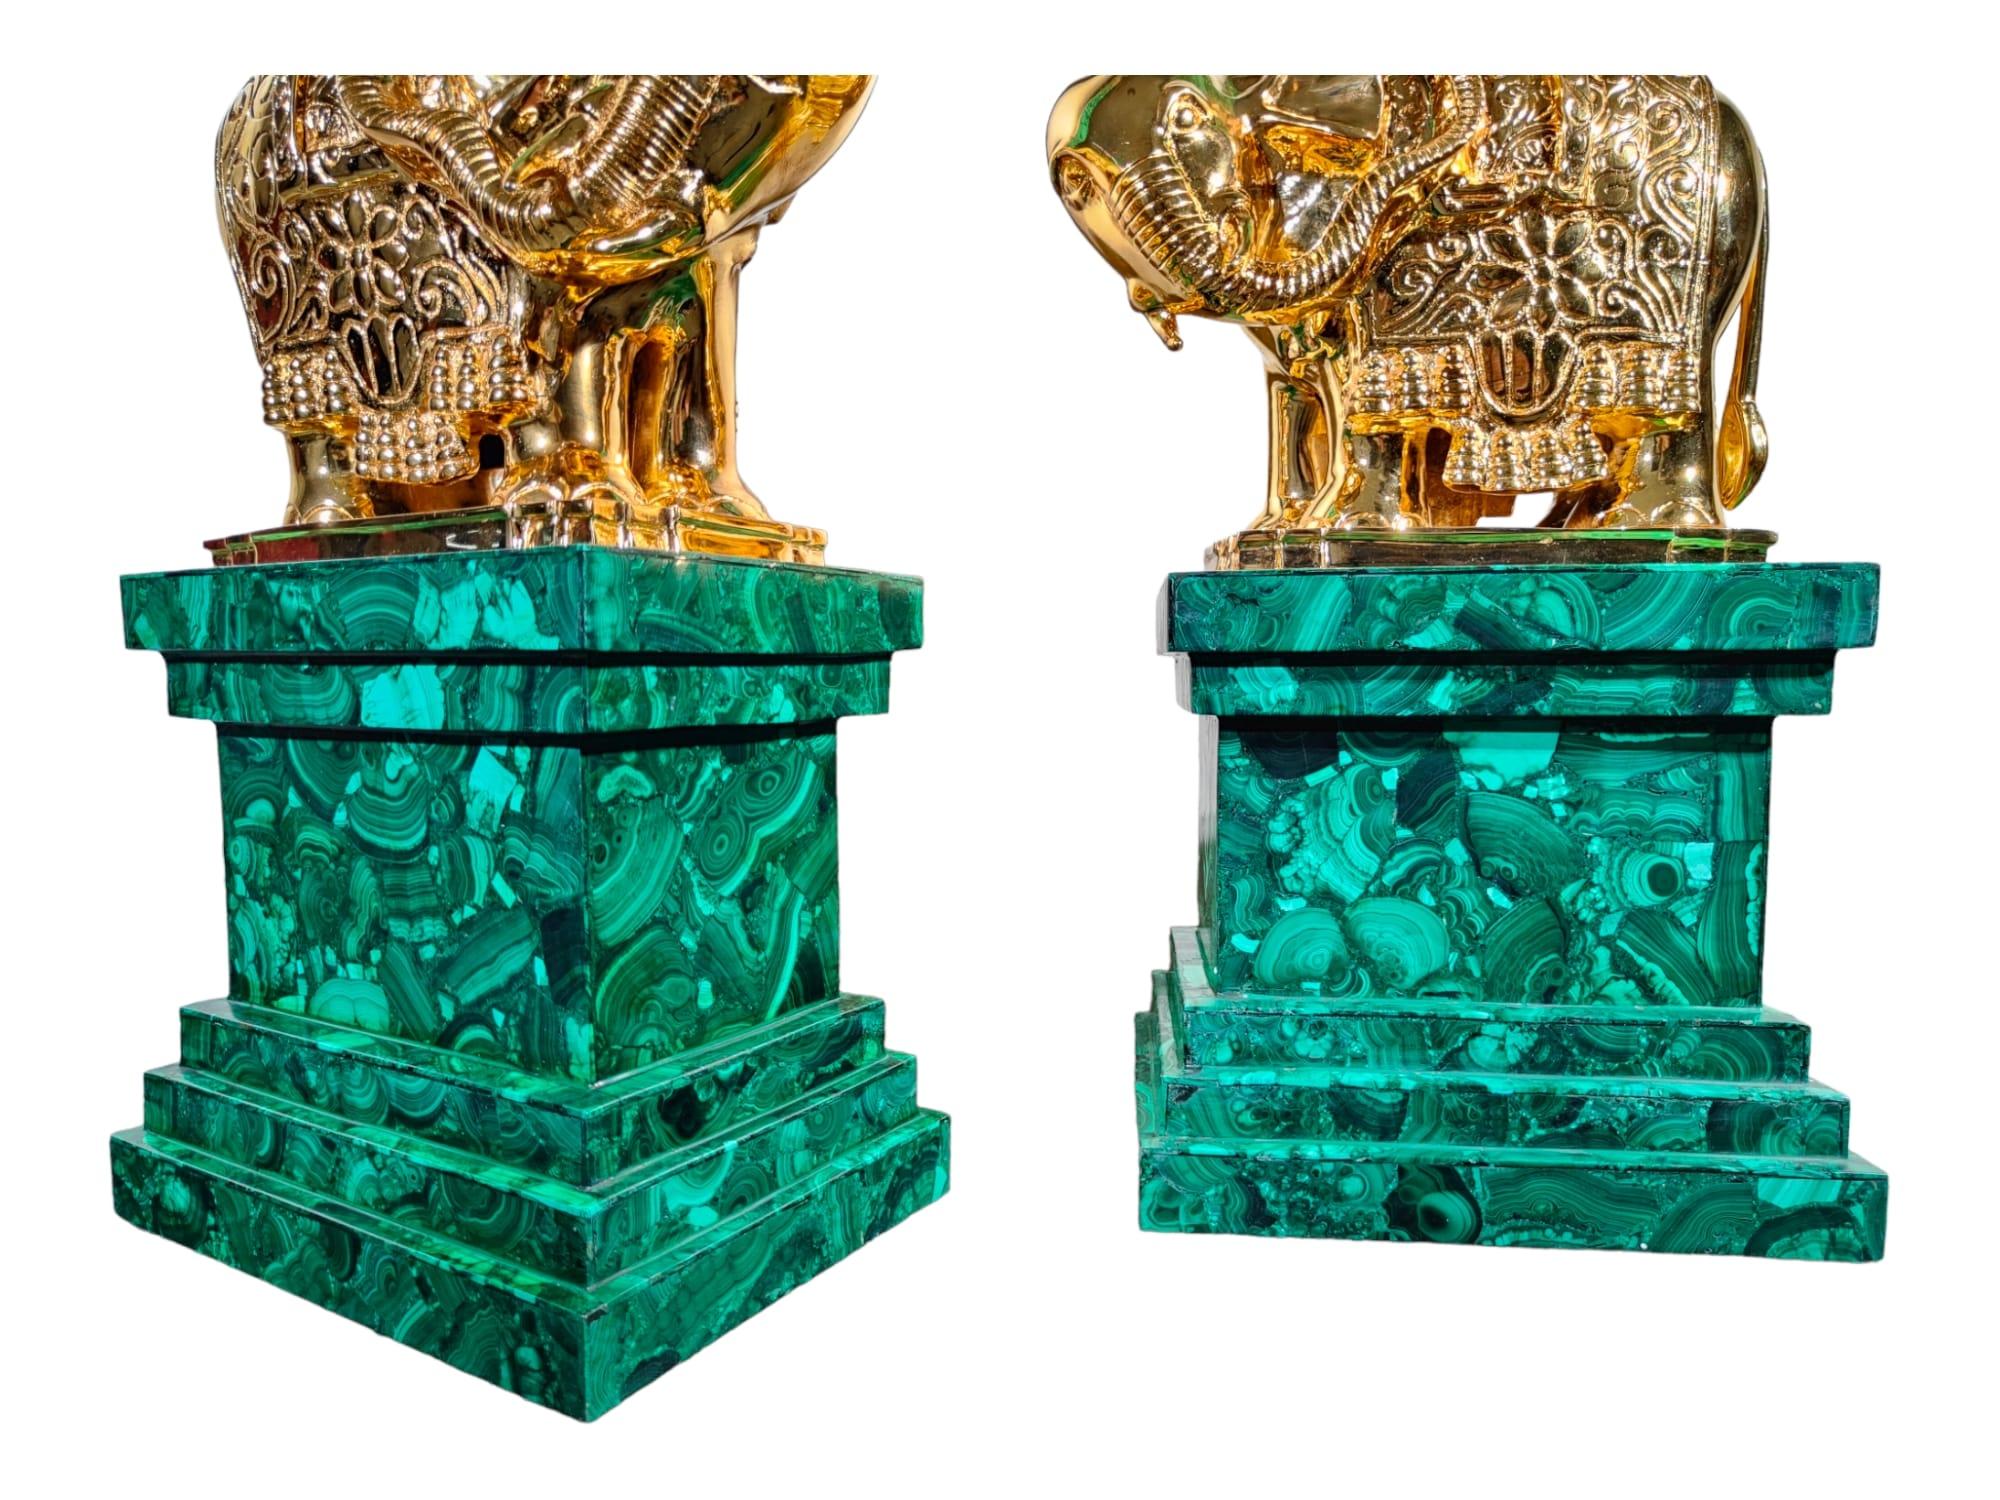 Italian Monumental Malachite Obelisks.
SPECTACULAR MALACHITE AND GILT BRONZE OBELIKS FROM THE 20TH CENTURY PROBABLY AN ITALIAN WORK FROM THE 50S. IN PERFECT STATE OF CONSERVATION. MEASURES: 112X27X21 CM.